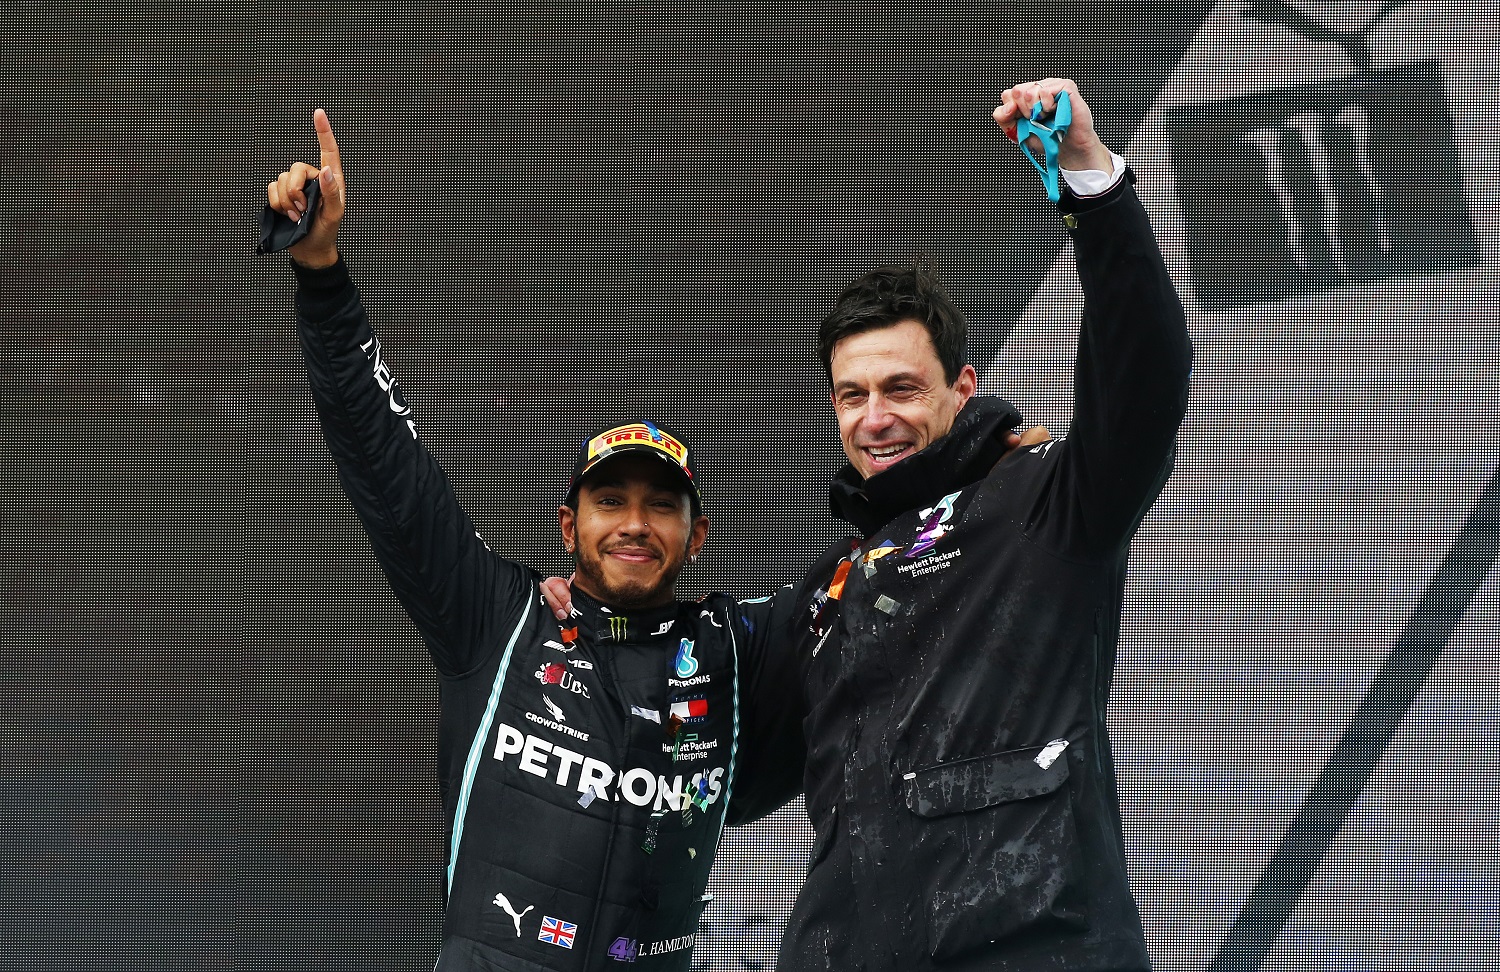 Lewis Hamilton celebrates his seventh Formula 1 World Drivers' Championship with Mercedes GP czar Toto Wolff after the Grand Prix of Turkey at Intercity Istanbul Park on Nov. 15, 2020. | Kenan Asyali - Pool/Getty Images